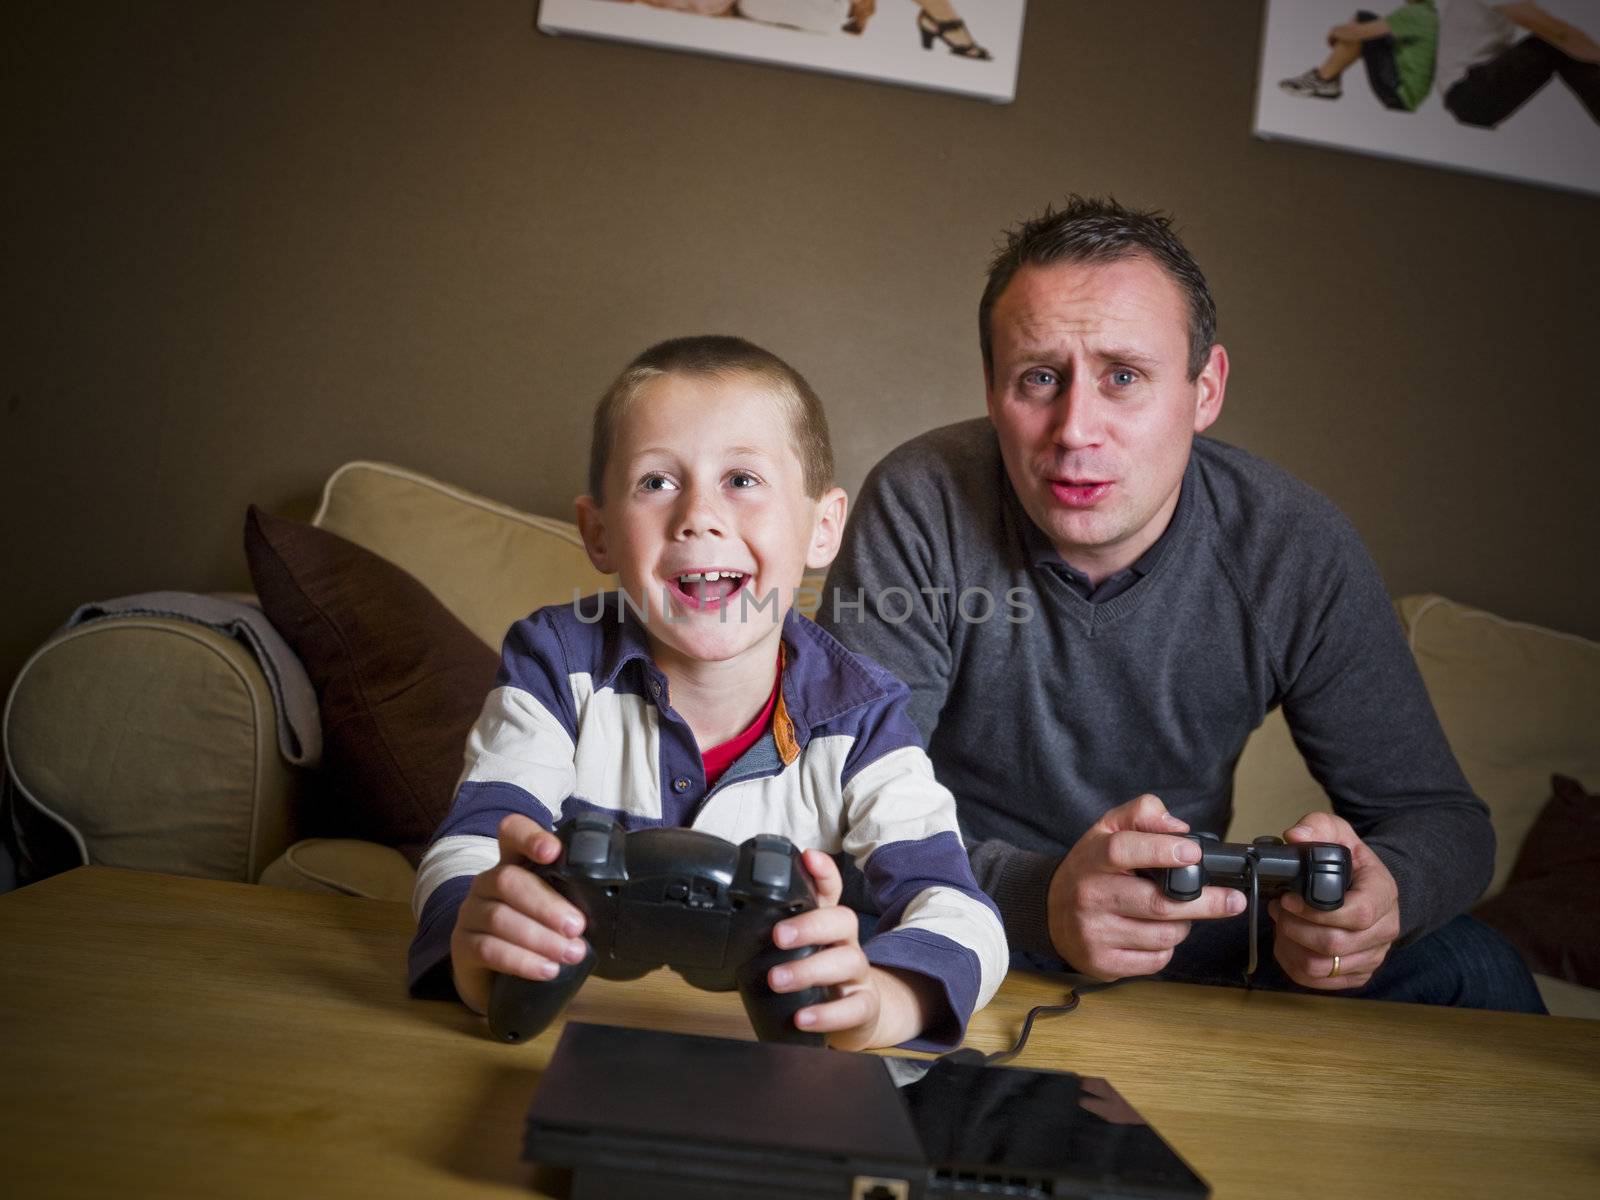 Father and son playing Video Games sitting in the Sofa